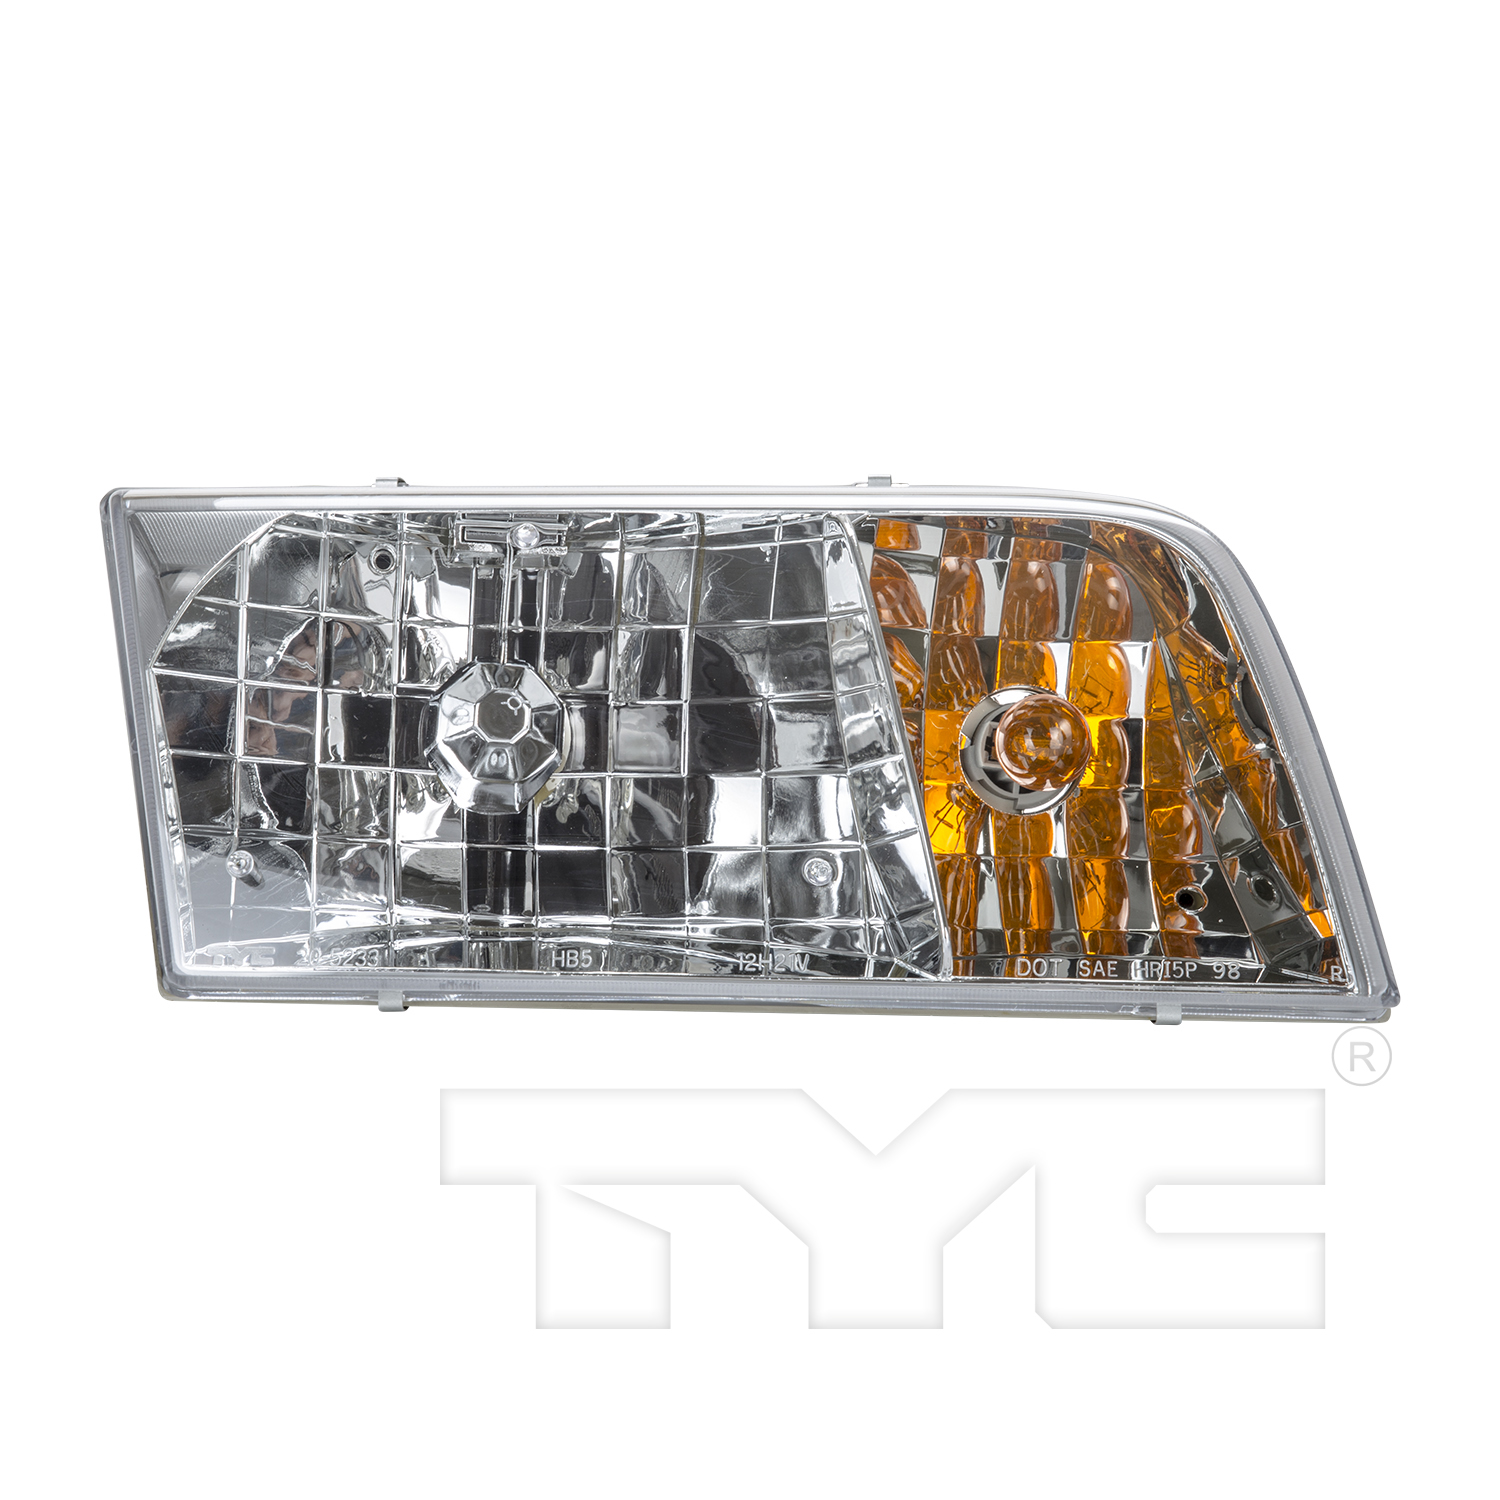 Aftermarket HEADLIGHTS for FORD - CROWN VICTORIA, CROWN VICTORIA,03-11,RT Headlamp assy composite